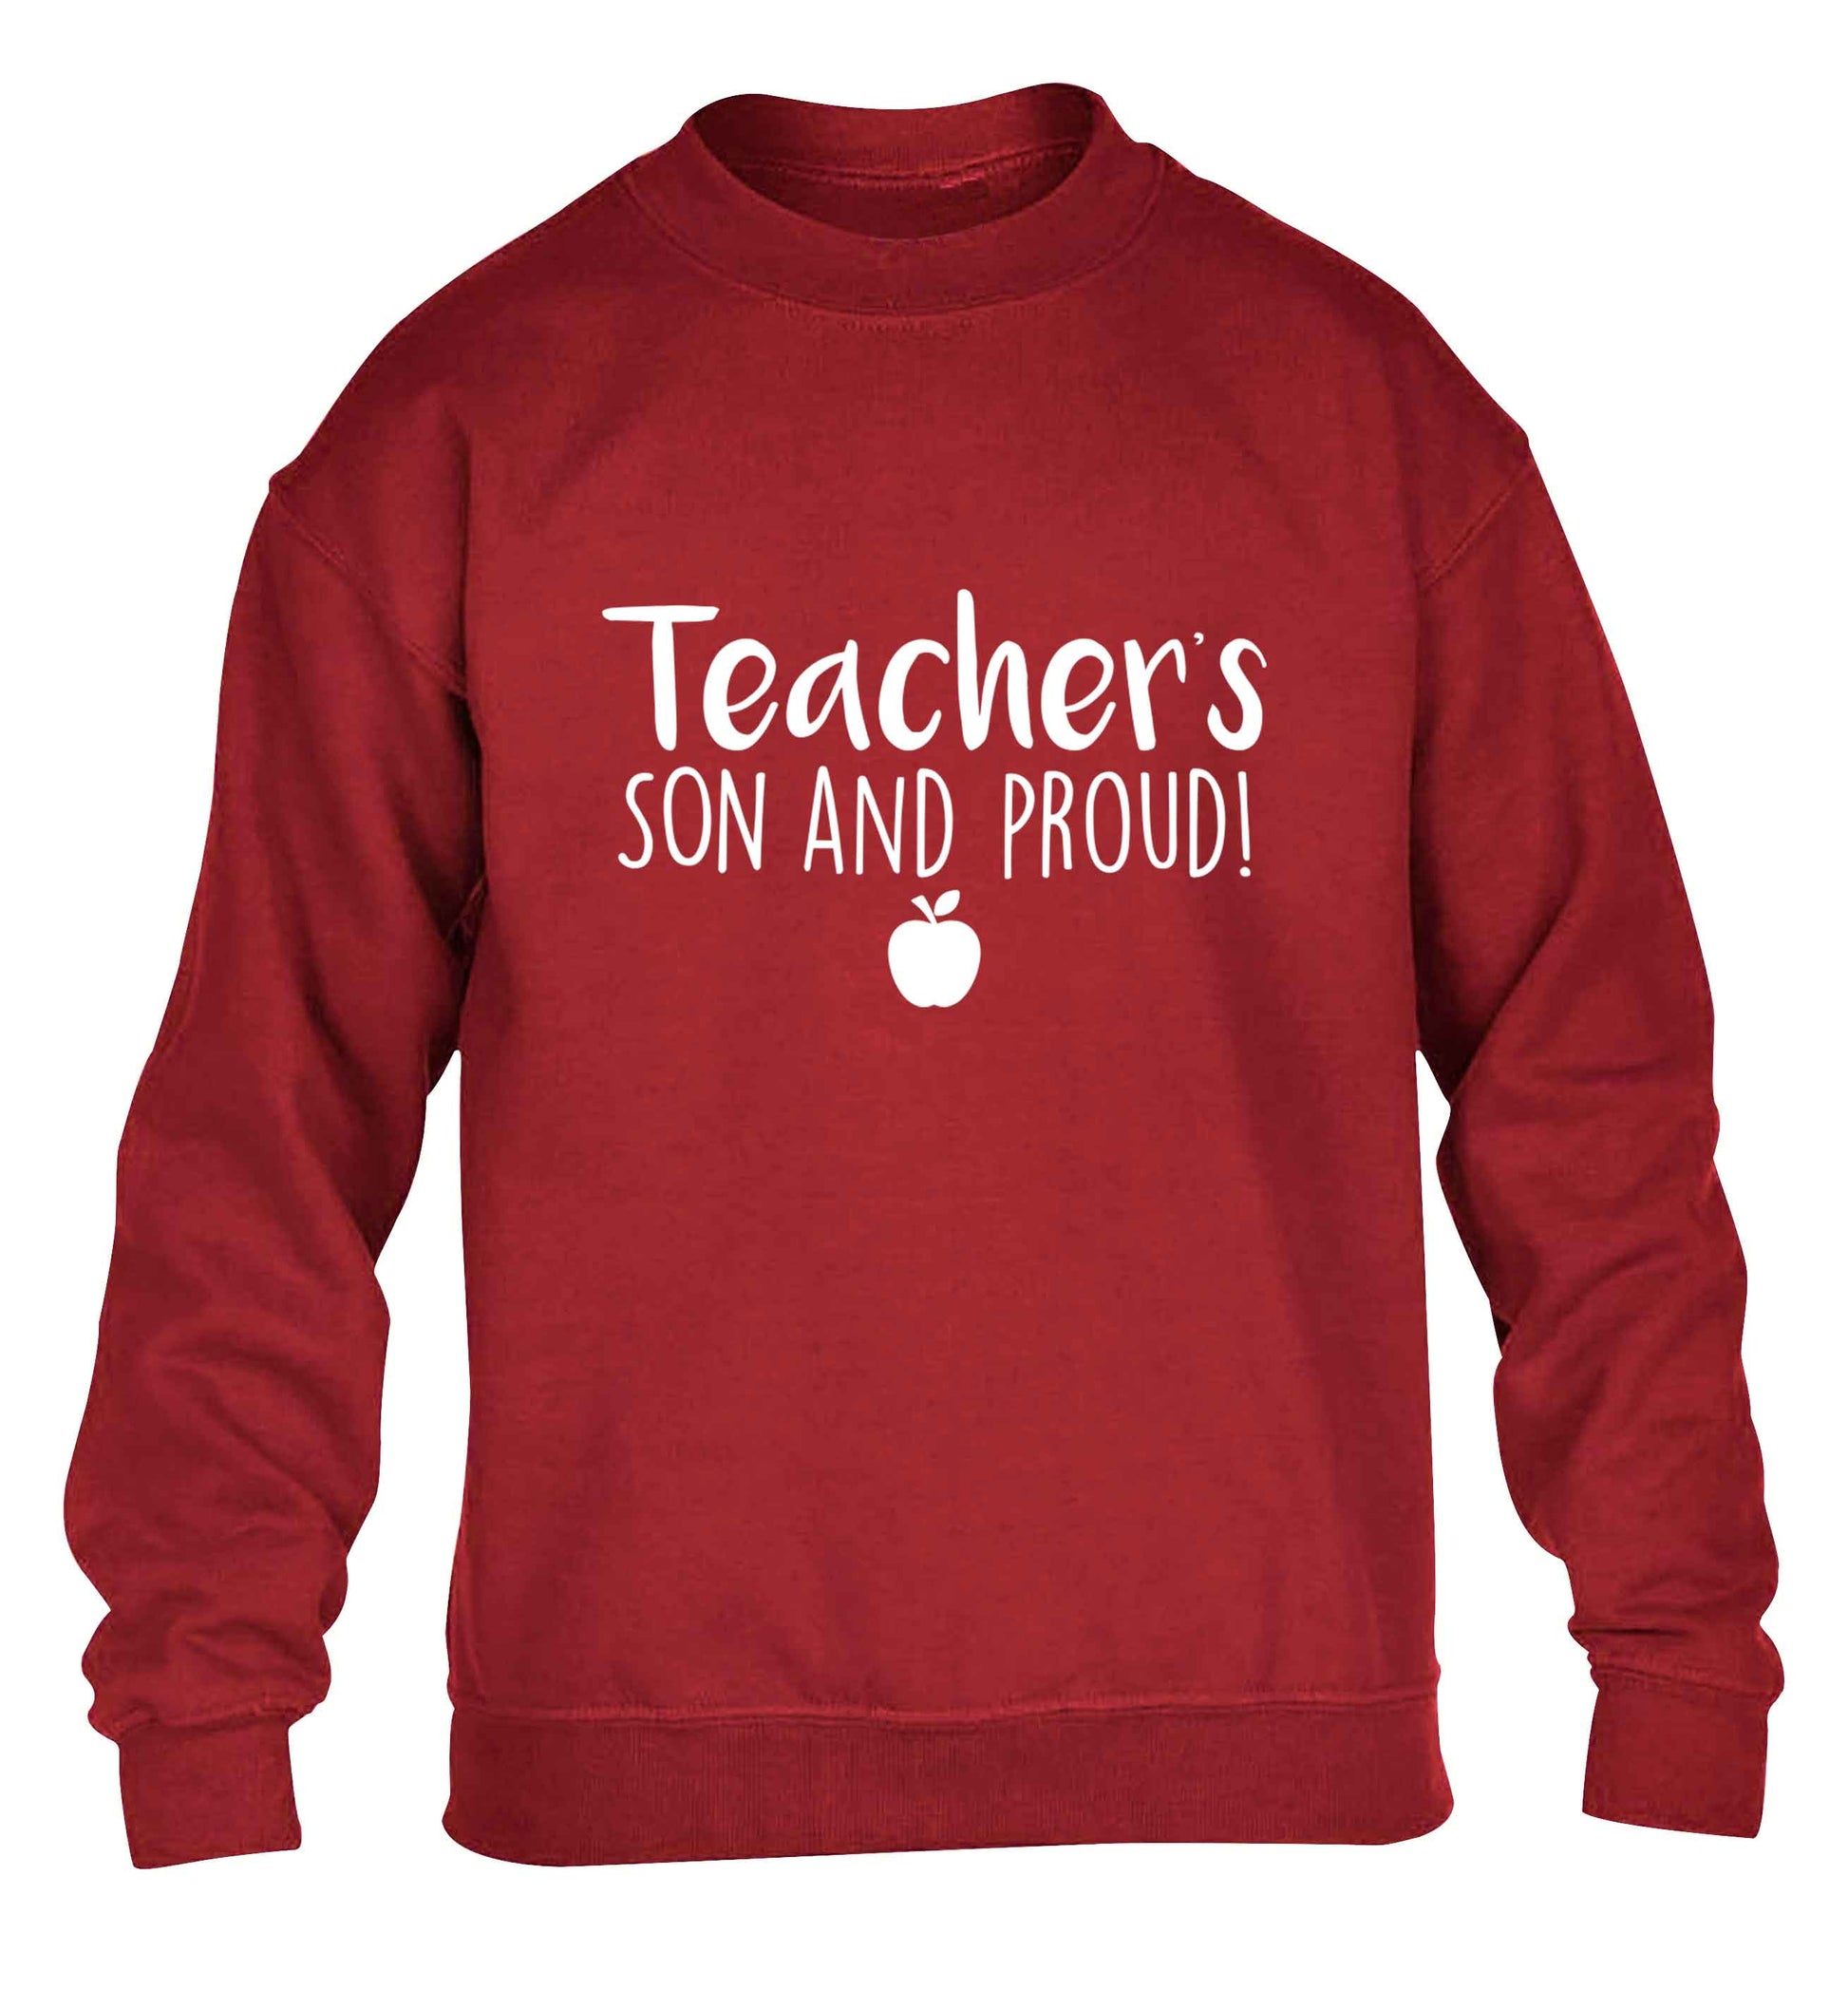 Teachers son and proud children's grey sweater 12-13 Years